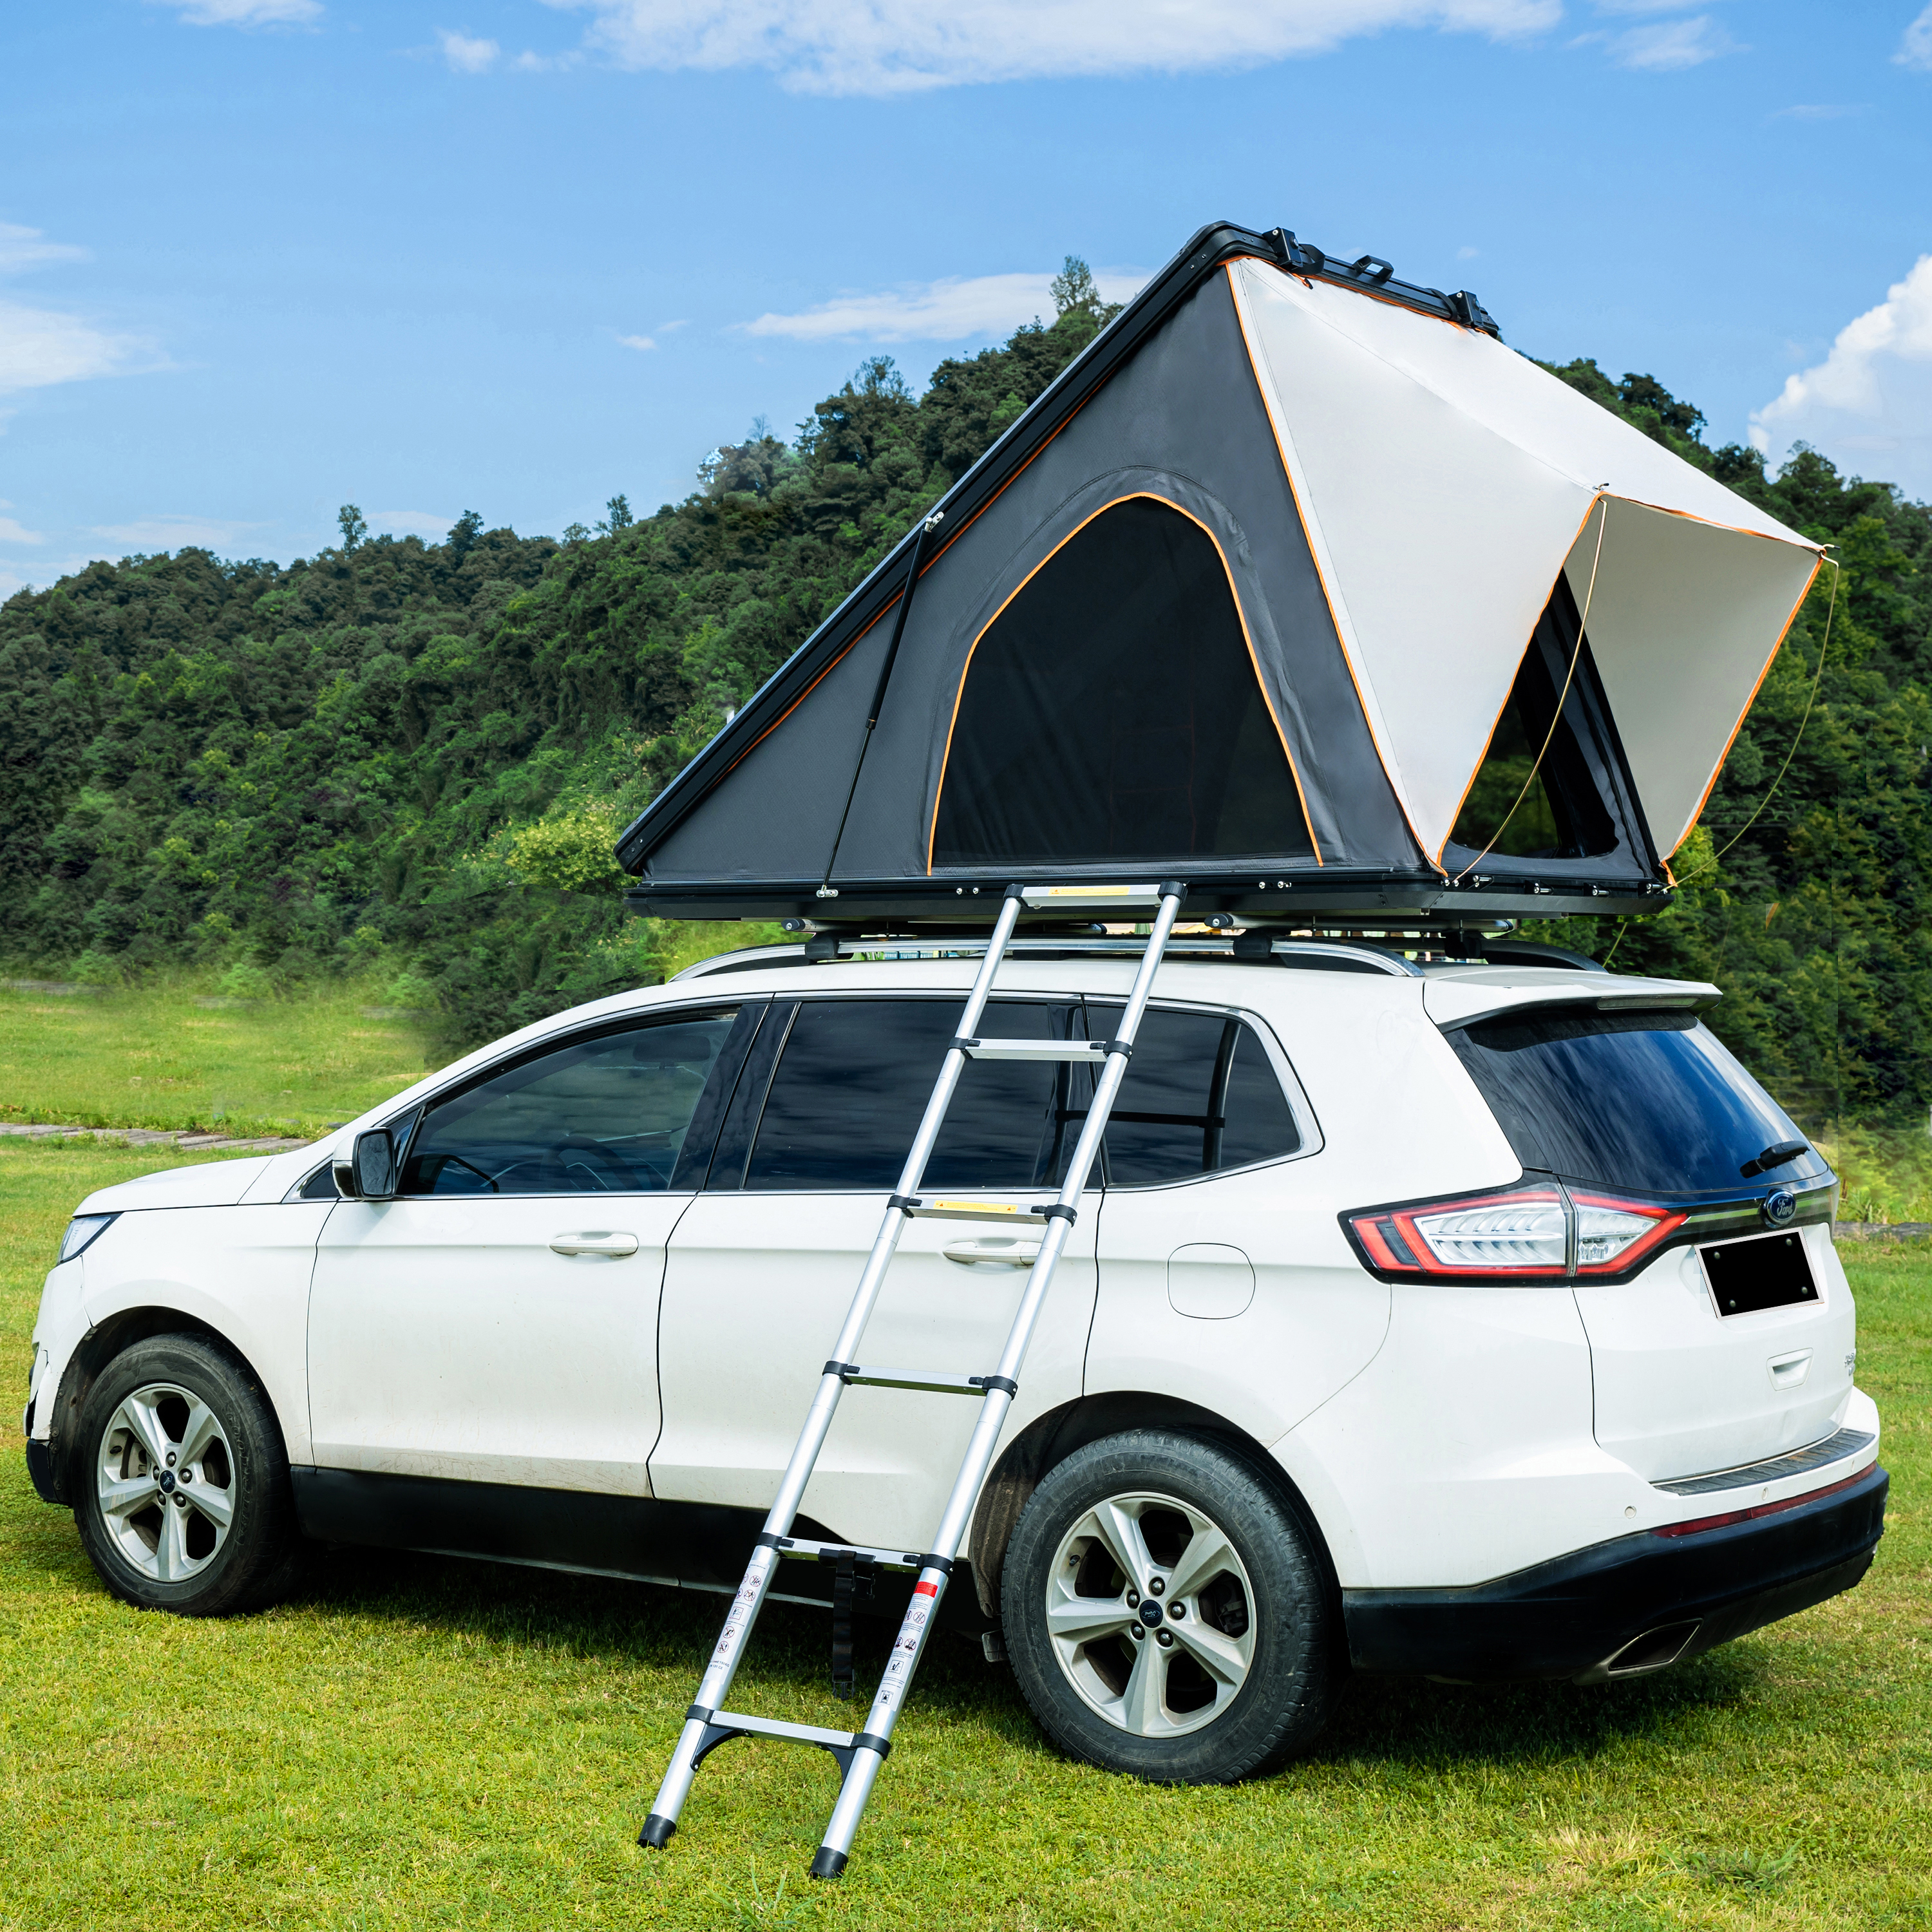 Scout Hardshell Rooftop Tent - Black/Grey